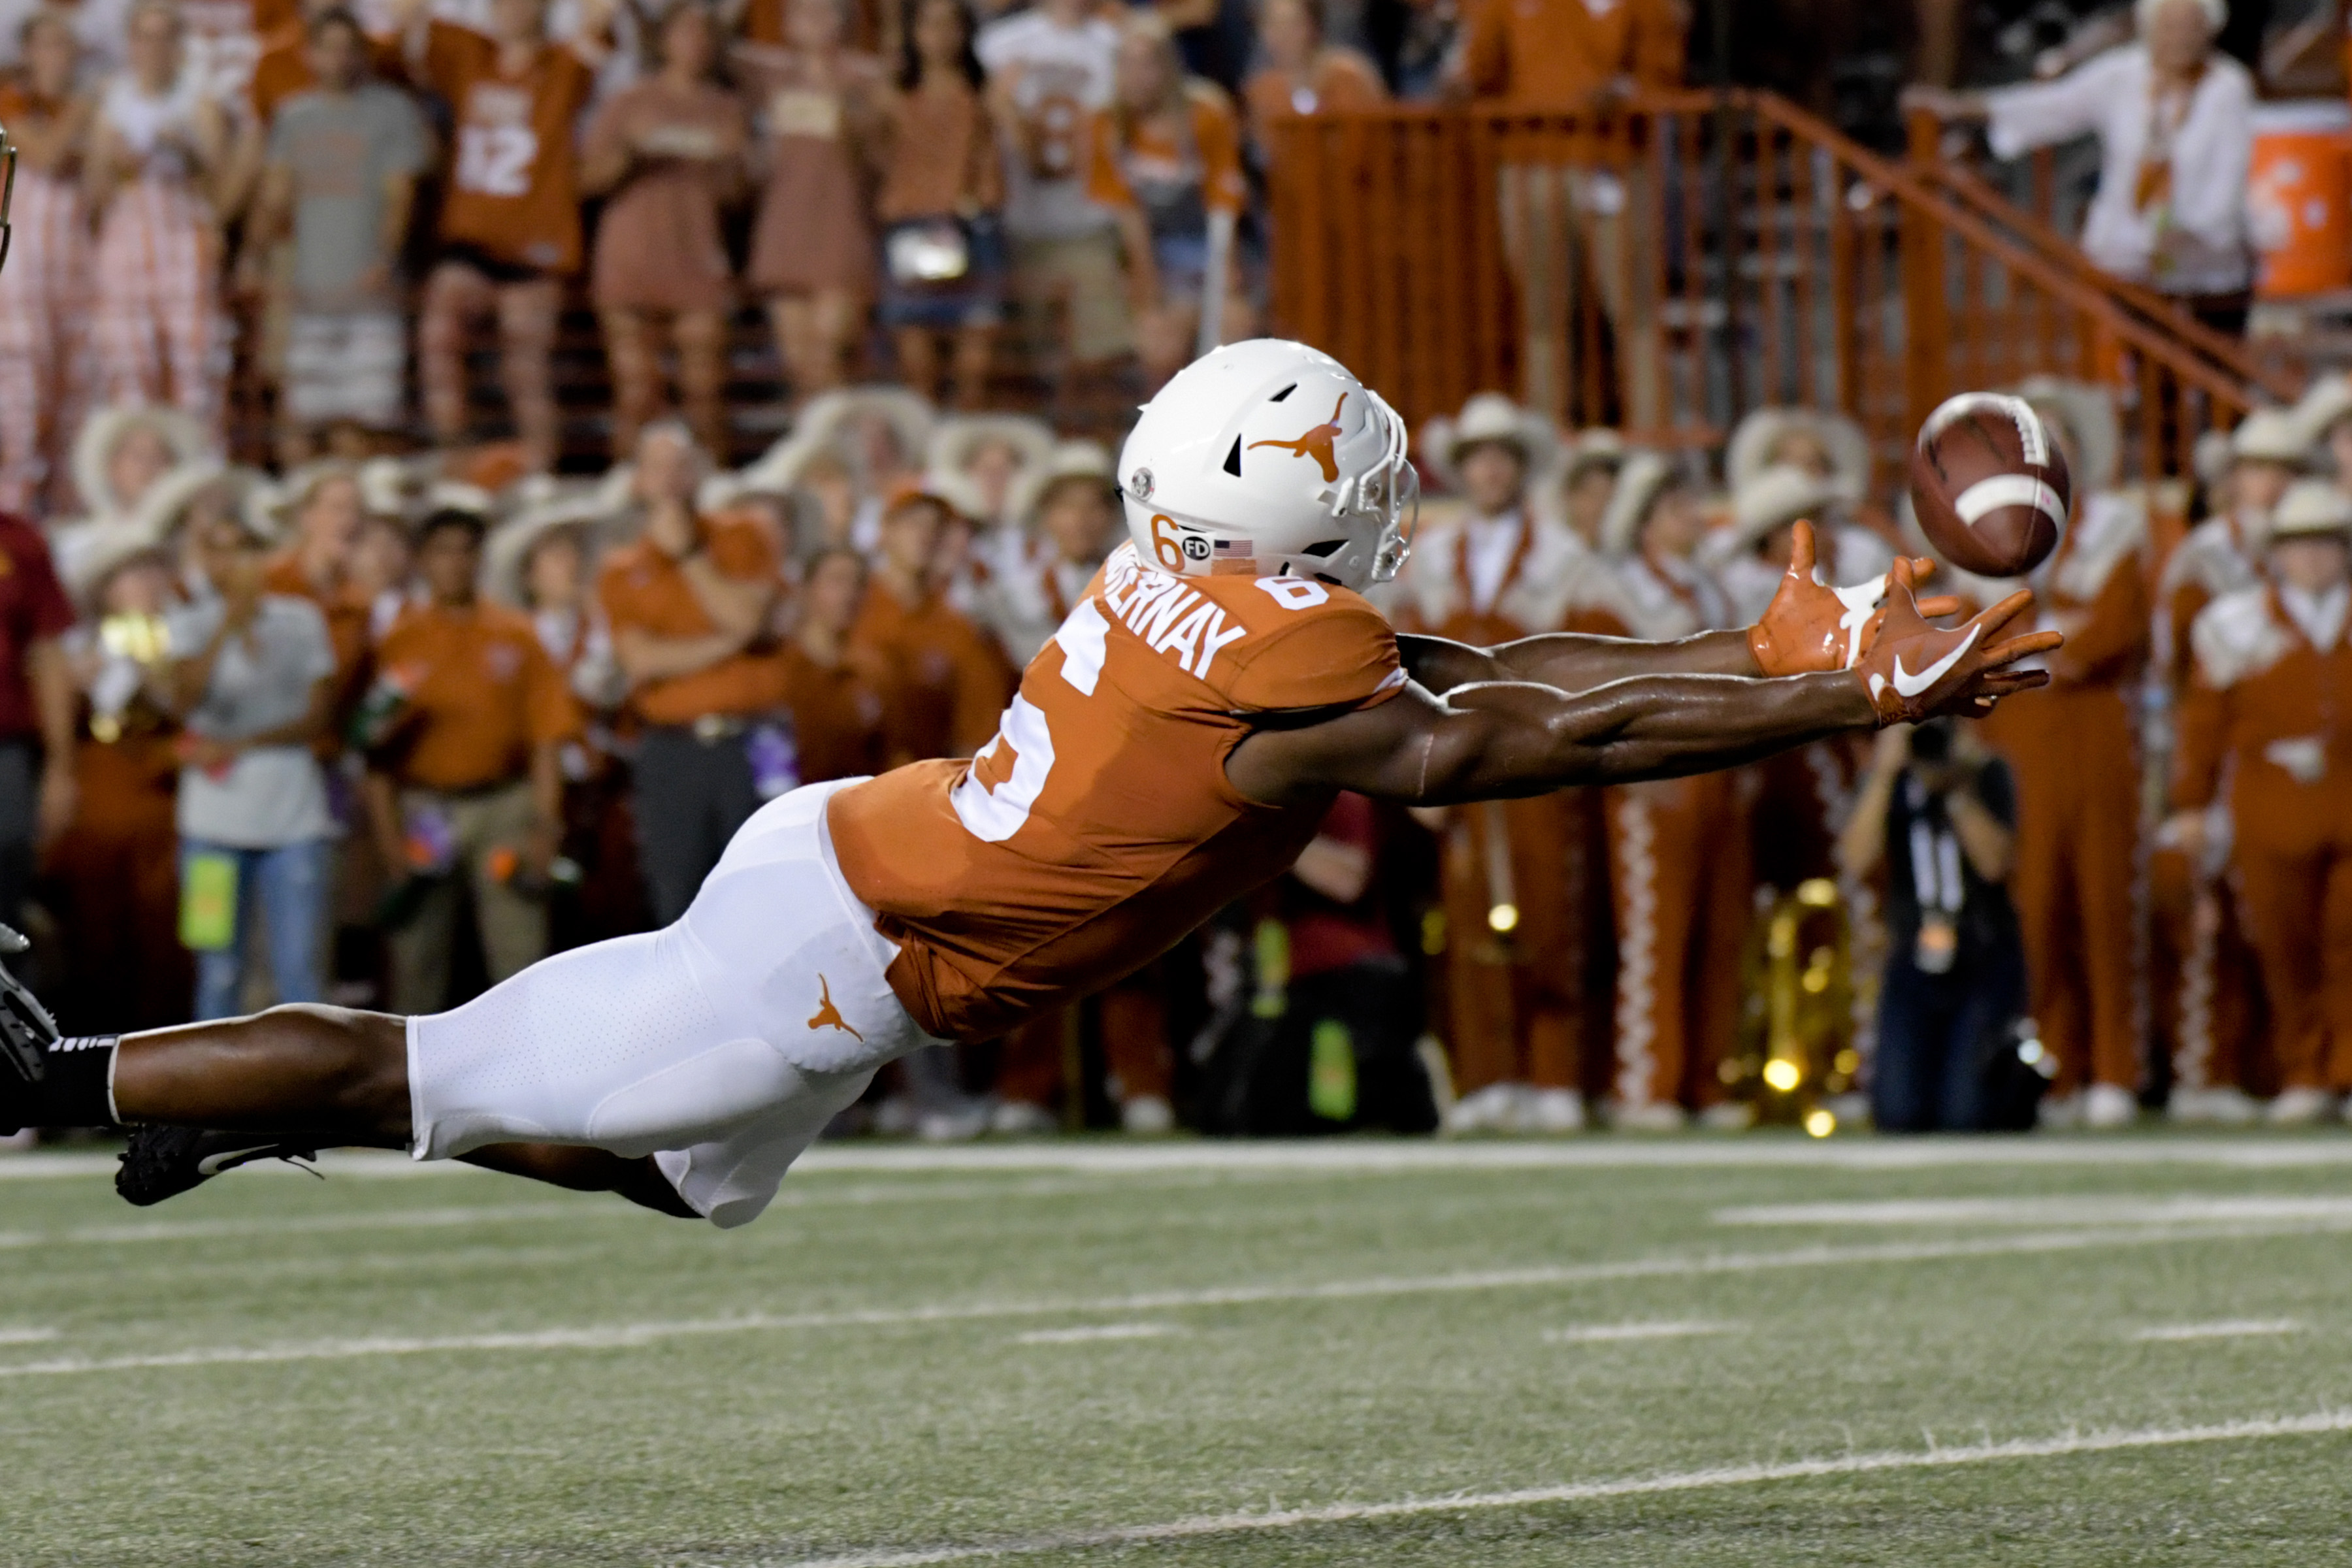 First official depth chart released for the Texas Longhorns